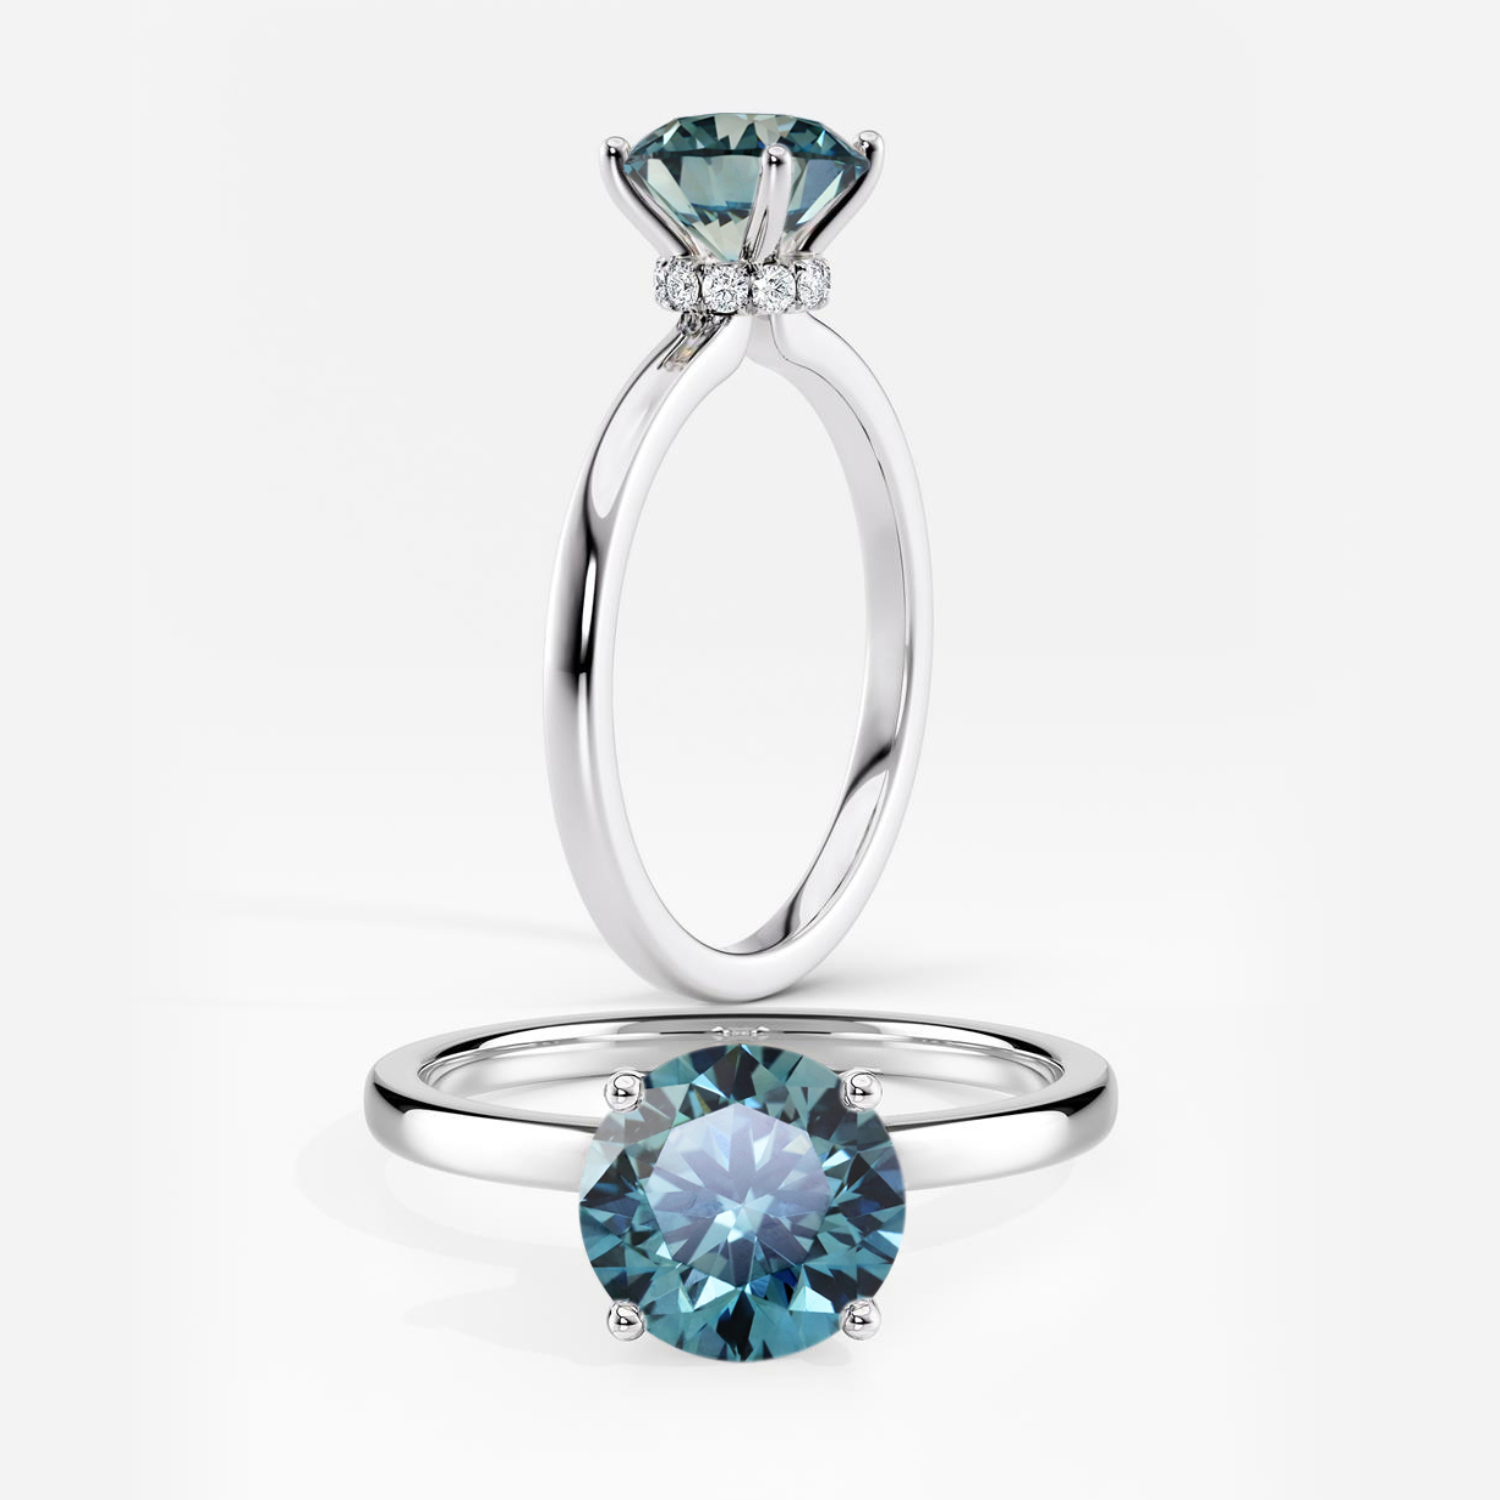 Lab Grown Diamond Ribbon Halo Engagement Ring Round 0.50 ct. (Blue, VS-SI) in 14k White Gold